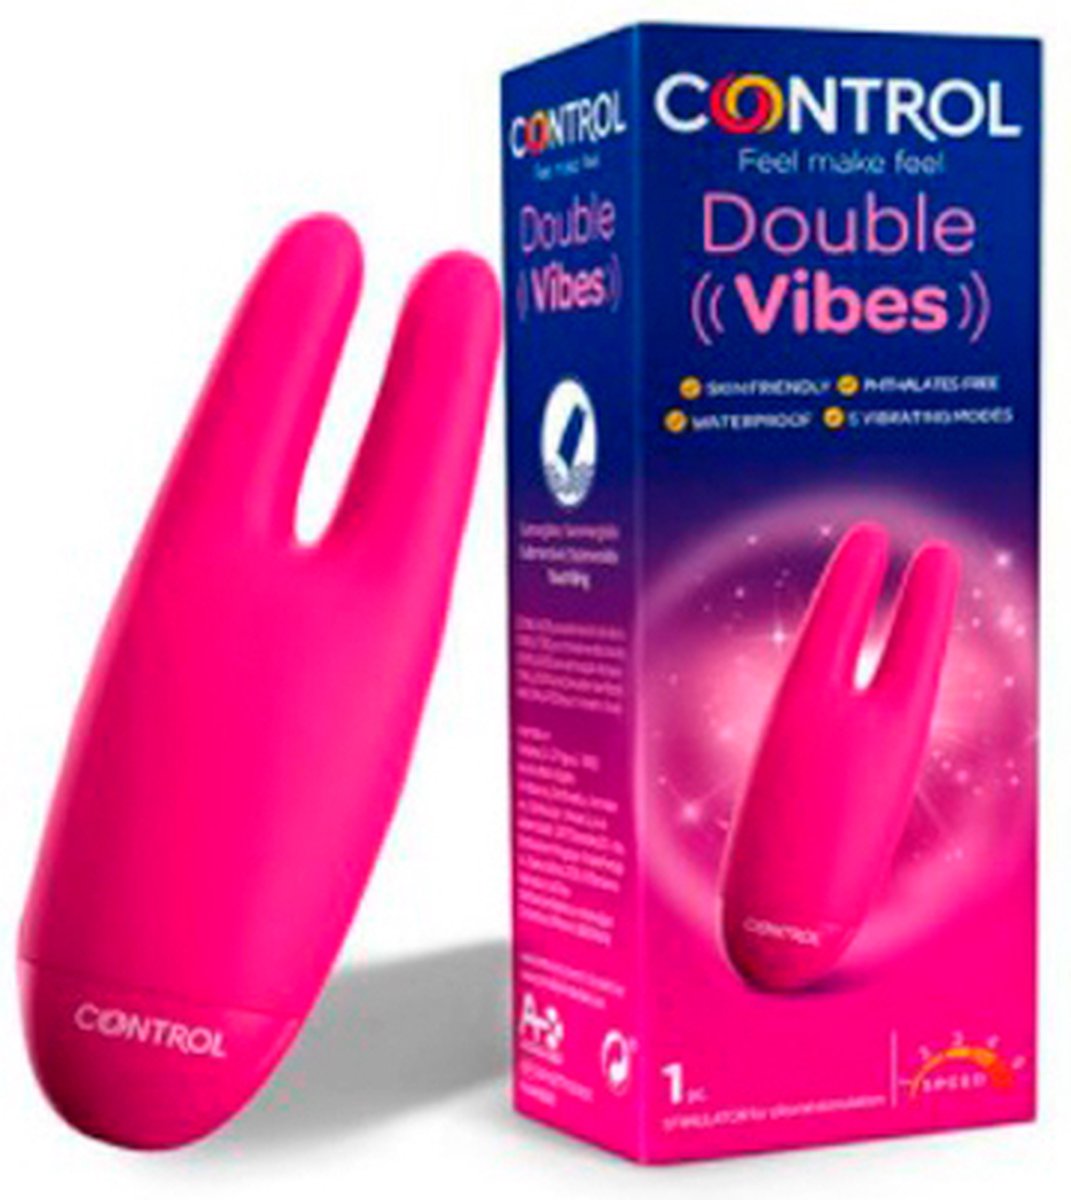 CONTROL | Control Double Vibes For Clitoral Stimulation